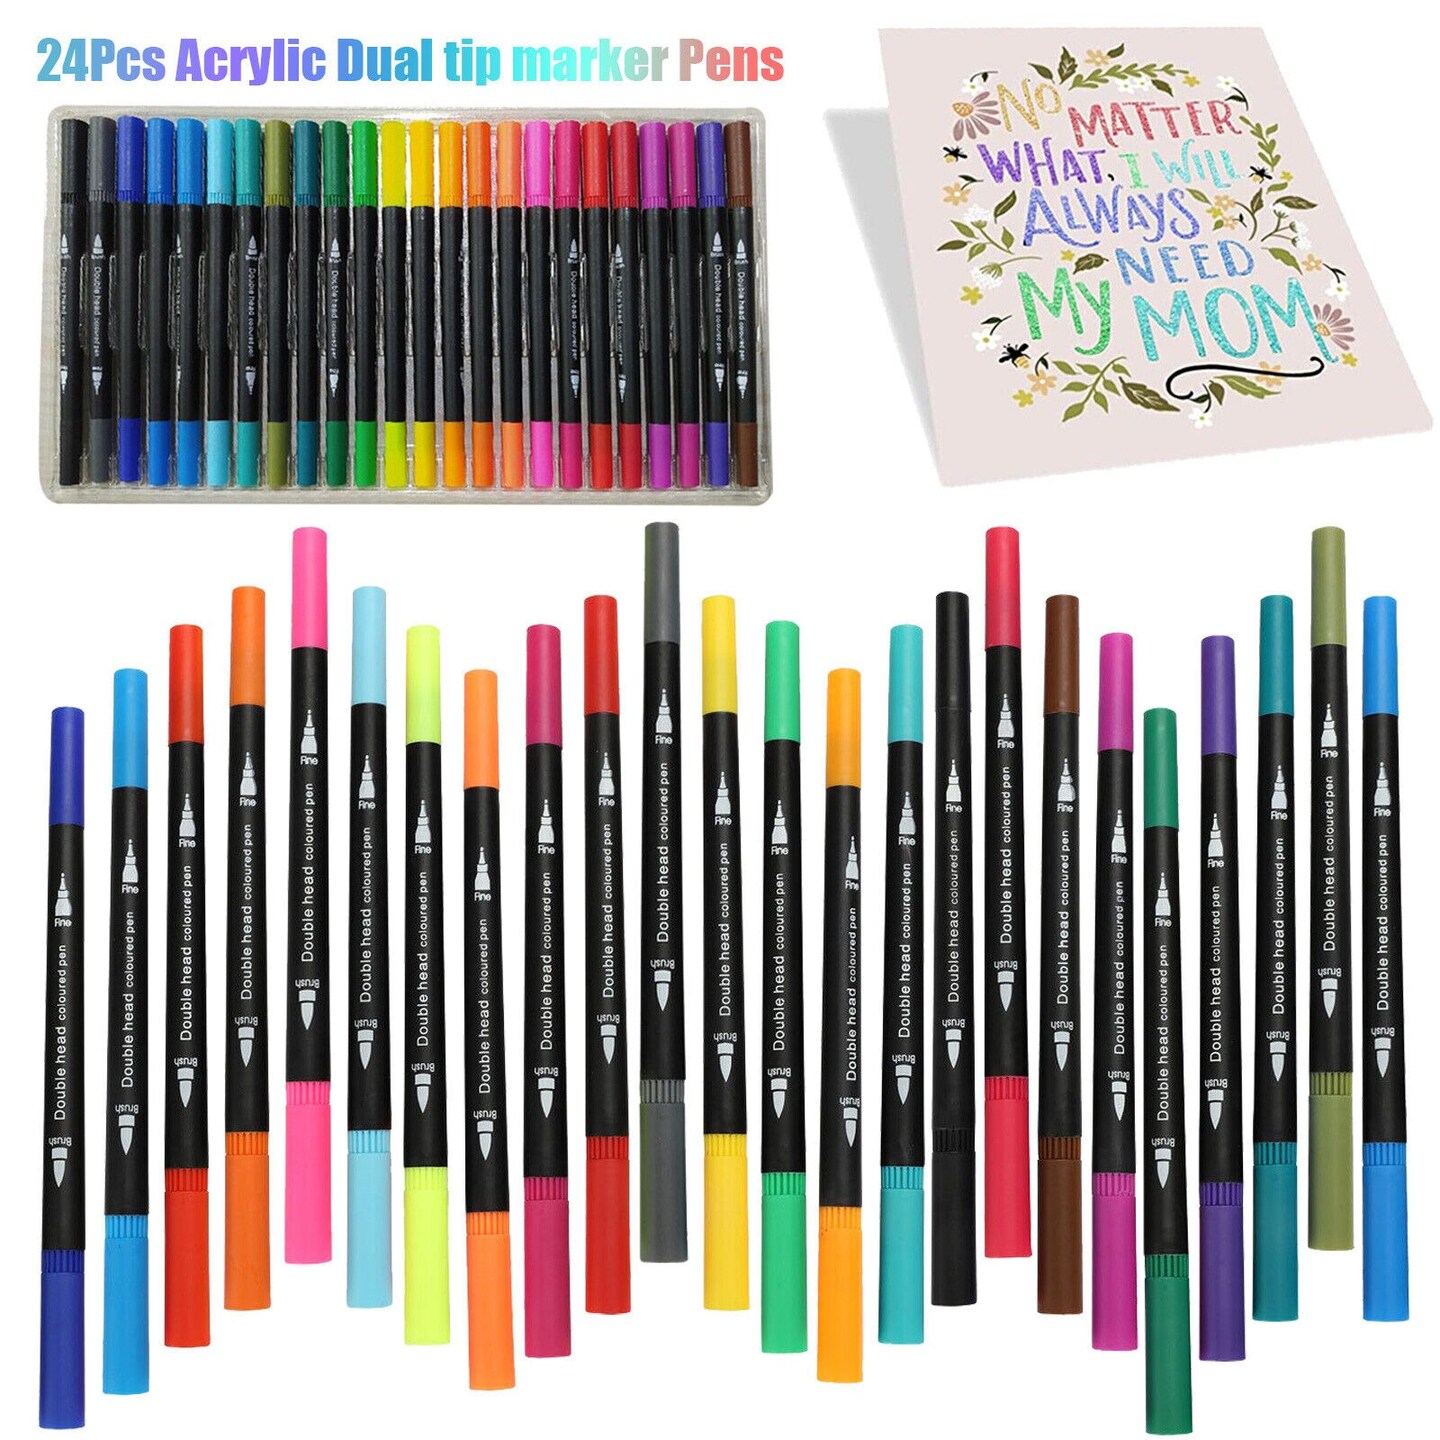 Dual Brush Tip Permanent Marker Paint Pens for Art Projects